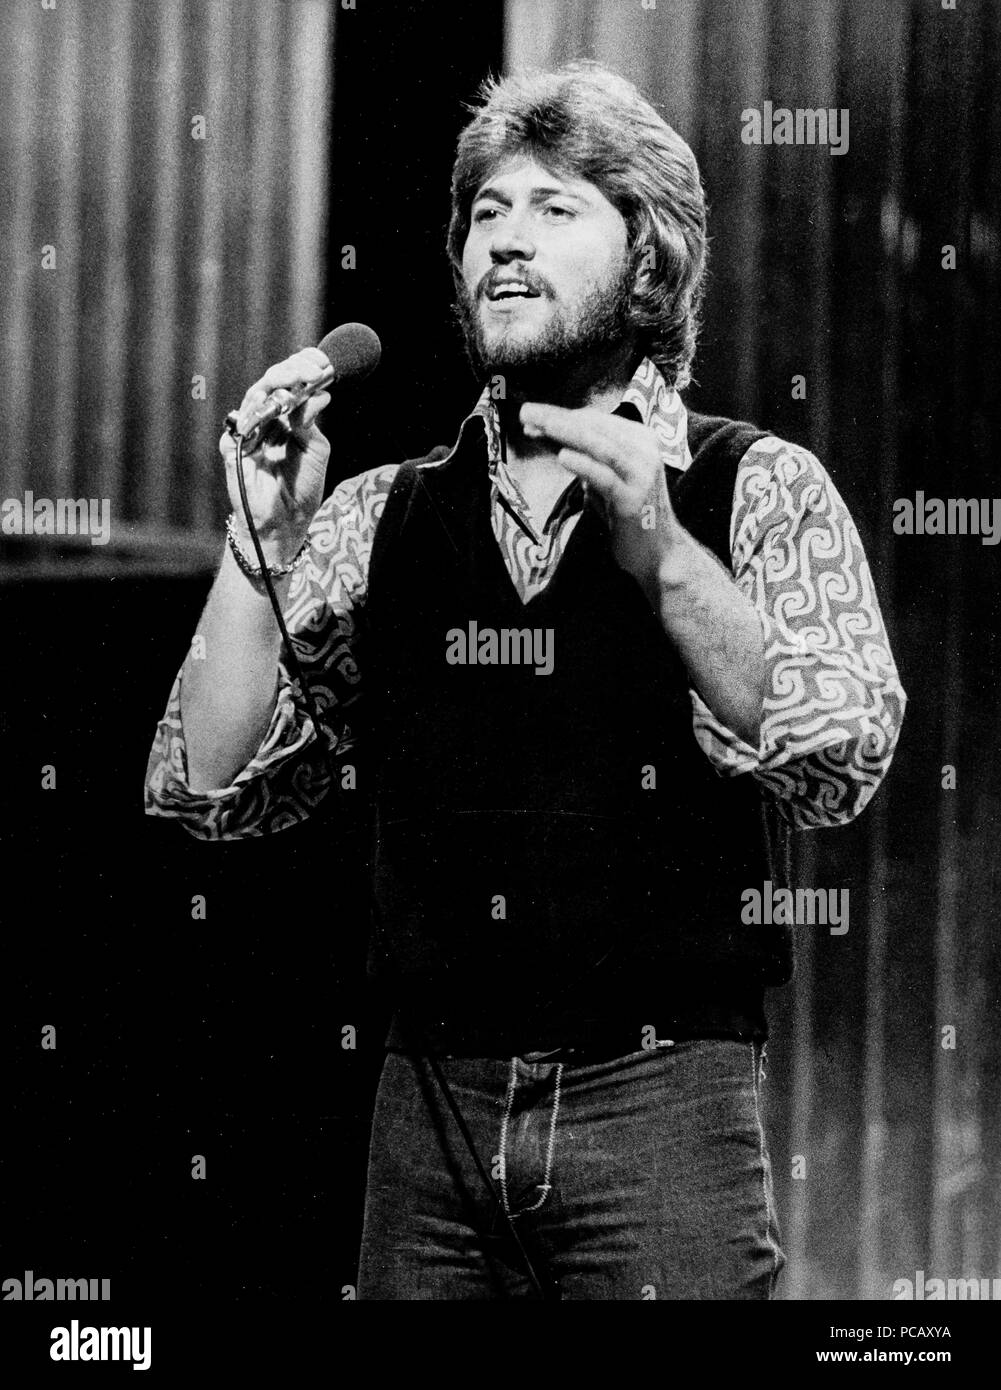 Barry Gibb i bee gees, parte superiore del pop, BBC, 70s Foto Stock